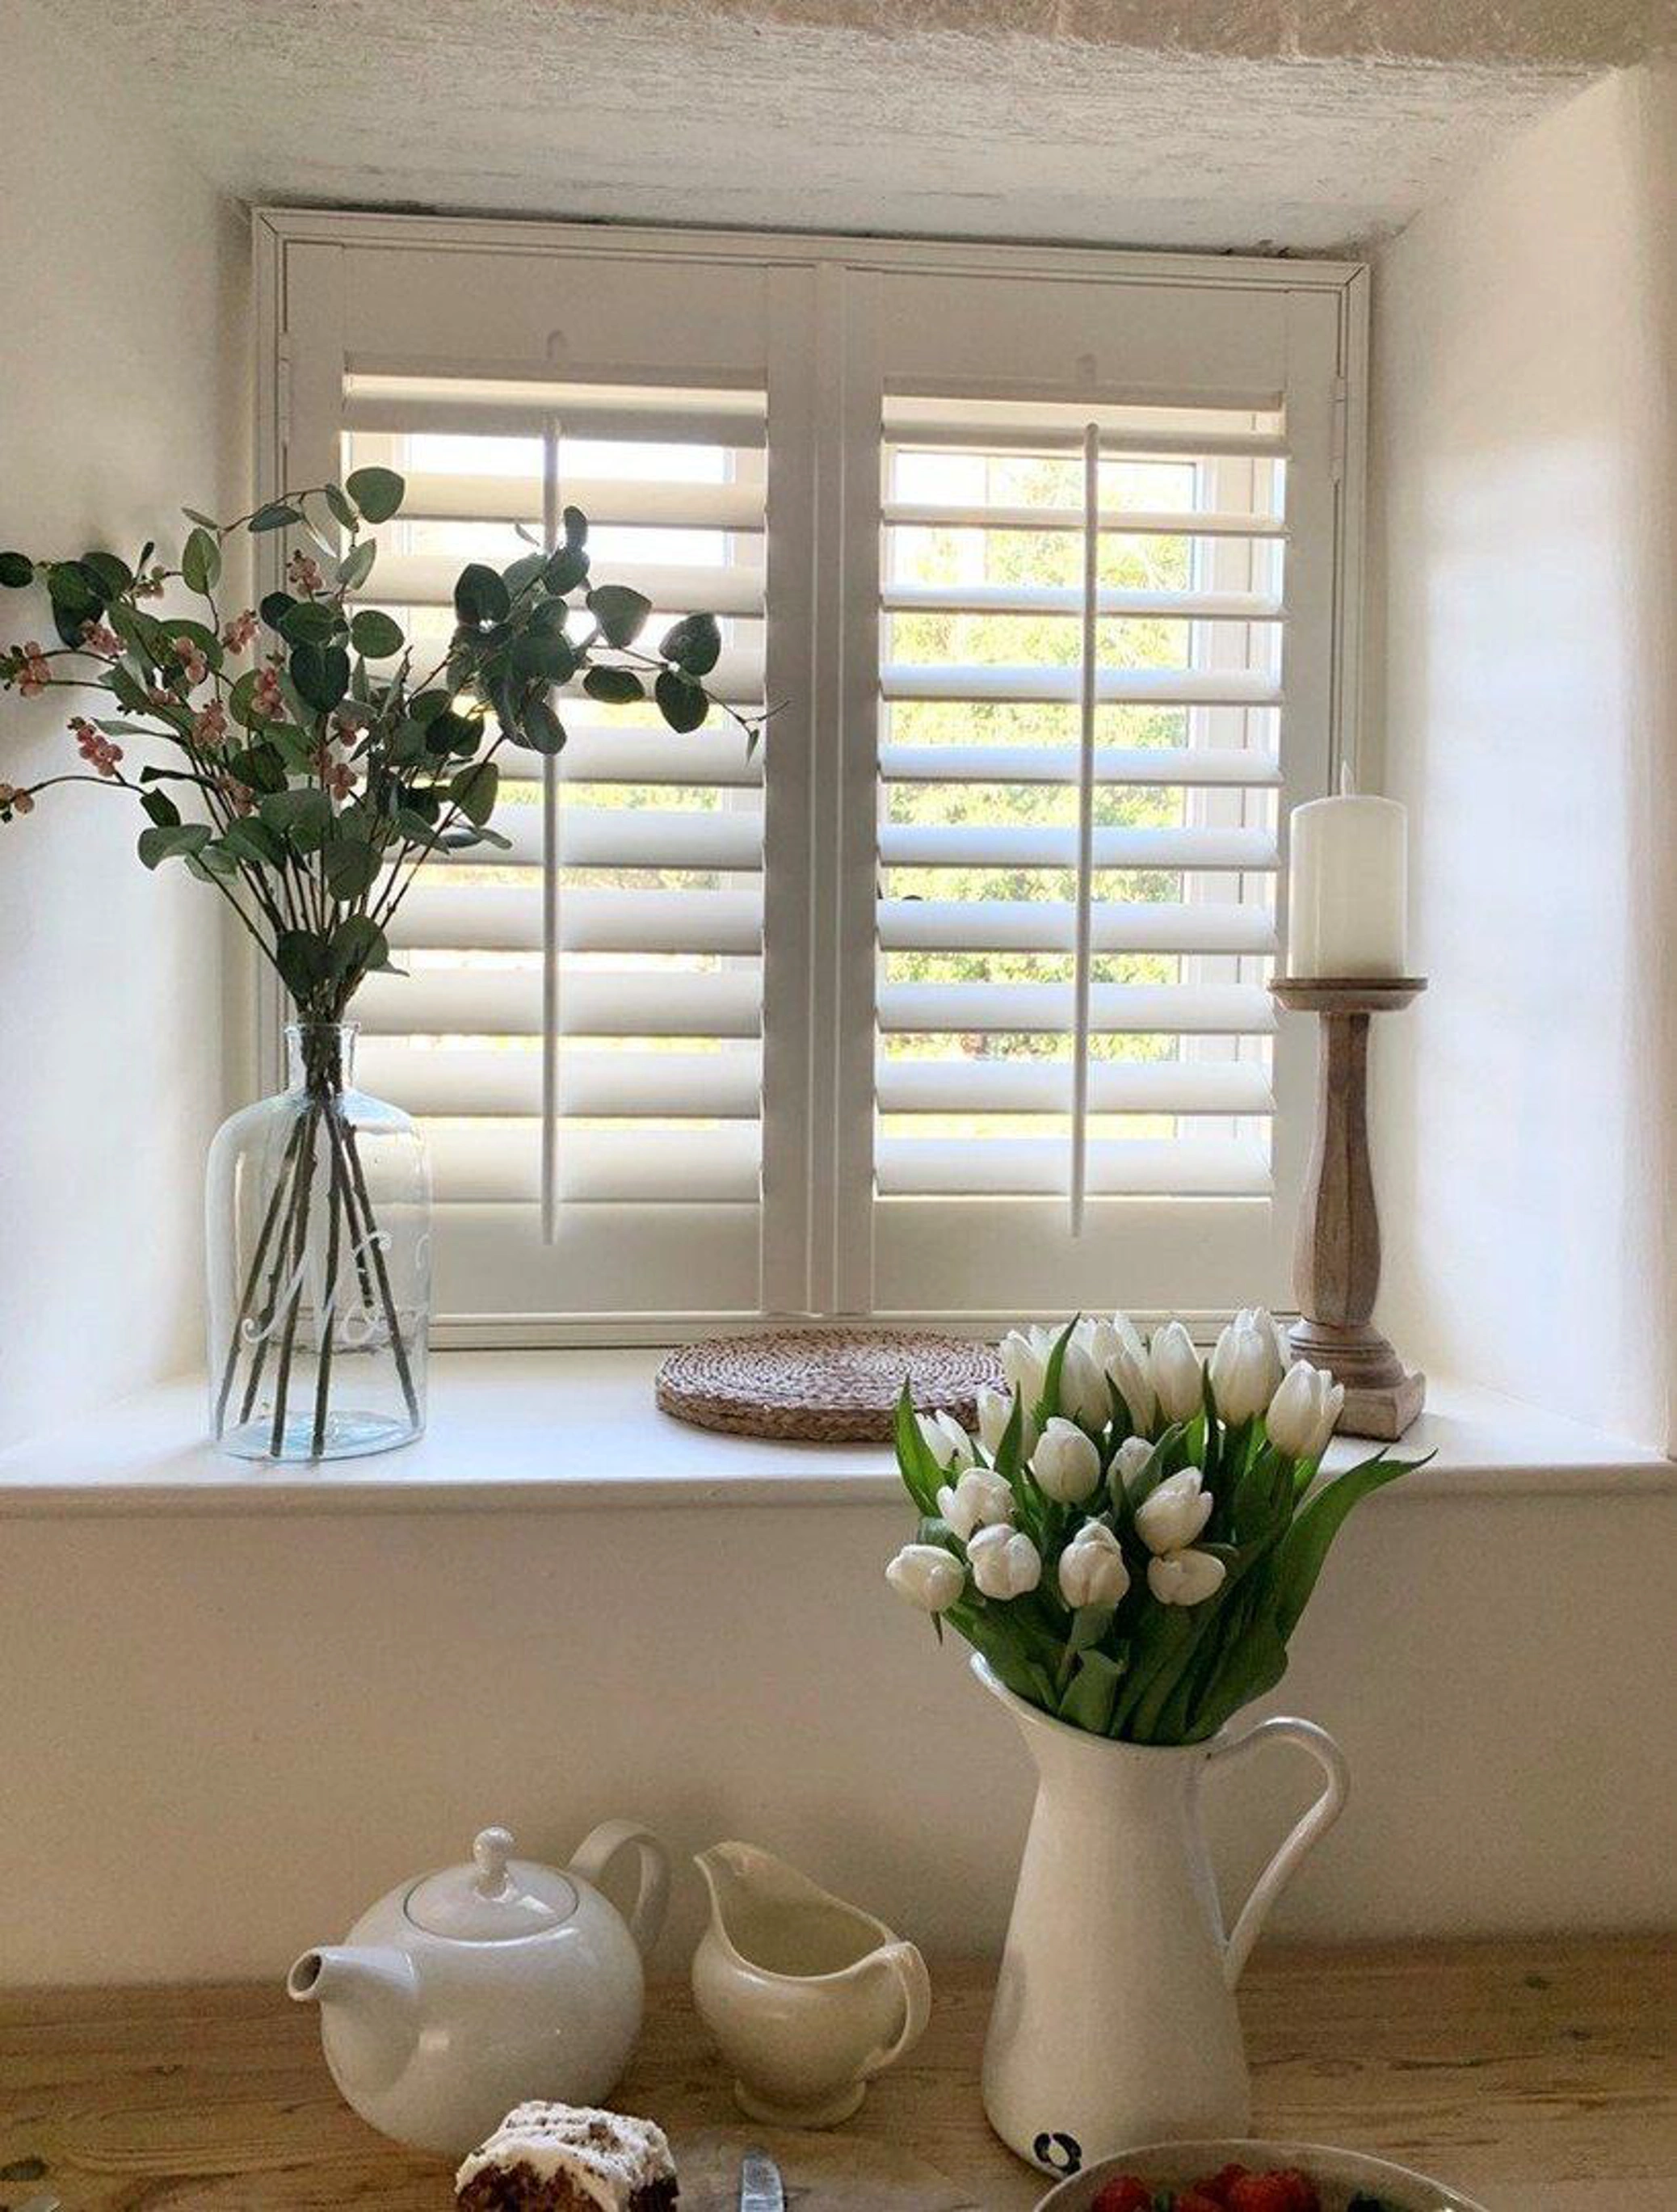 Traffic White full height wooden shutters in cottage window